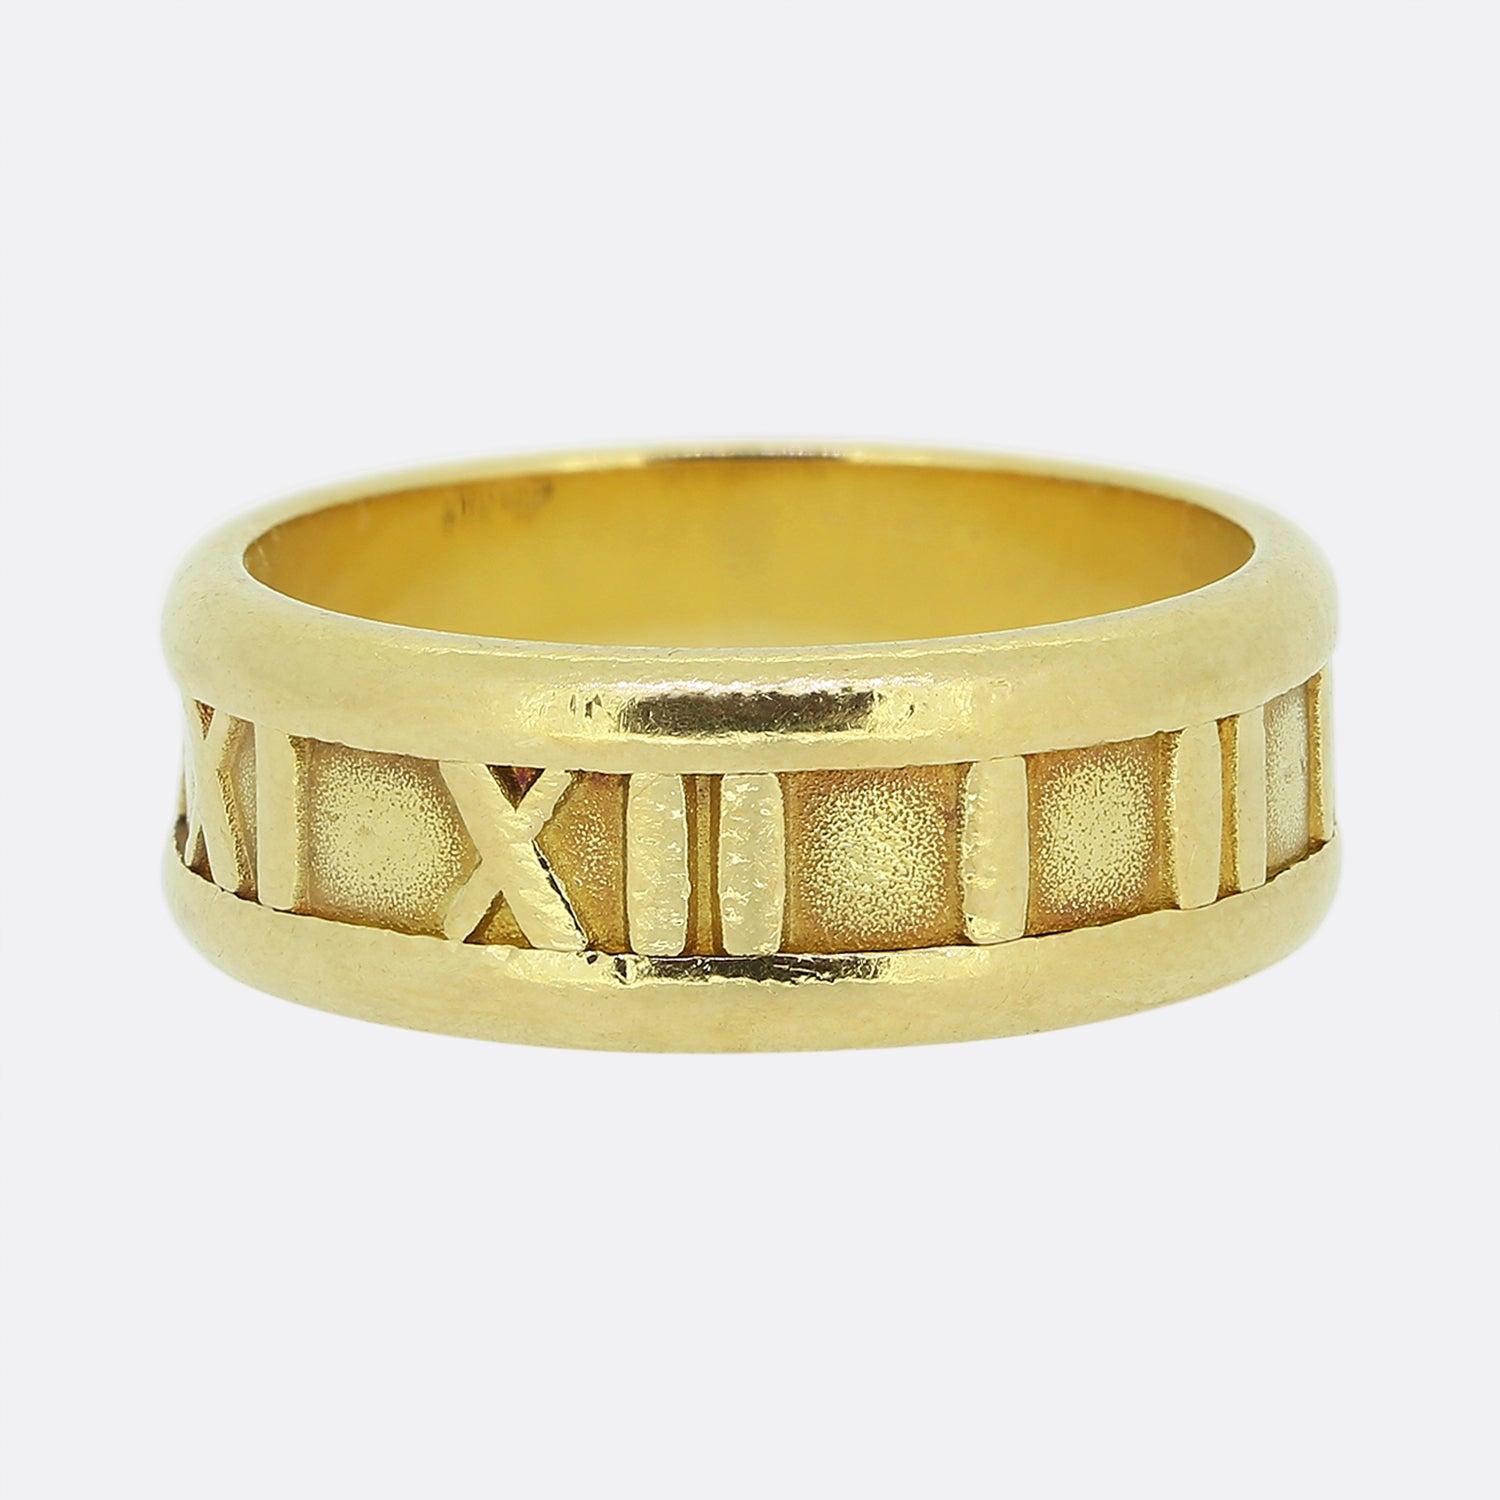 Here we have a classic ring from the world renowned jewellery designers, Tiffany & Co. This piece form part of their Atlas collection and showcases the iconic Roman numeral design around the entirety of an 18ct yellow gold band. 

Condition: Used